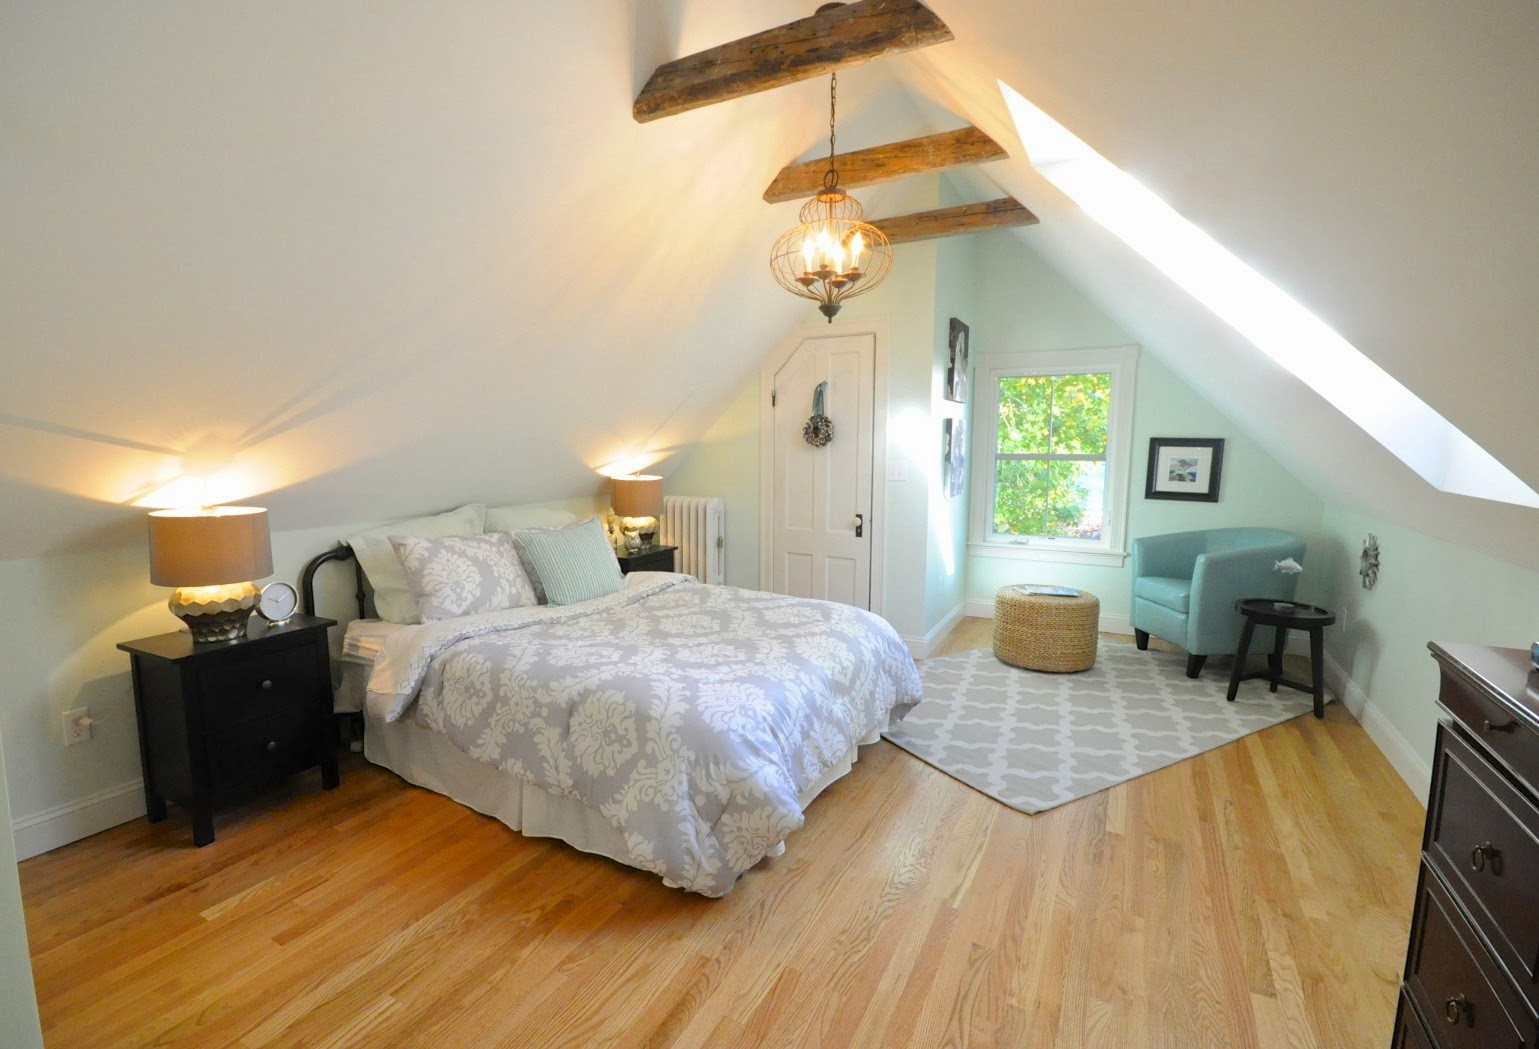 Attic Master Bedroom Ideas
 Creating a Master Bedroom from Unused Attic Space by SoPo